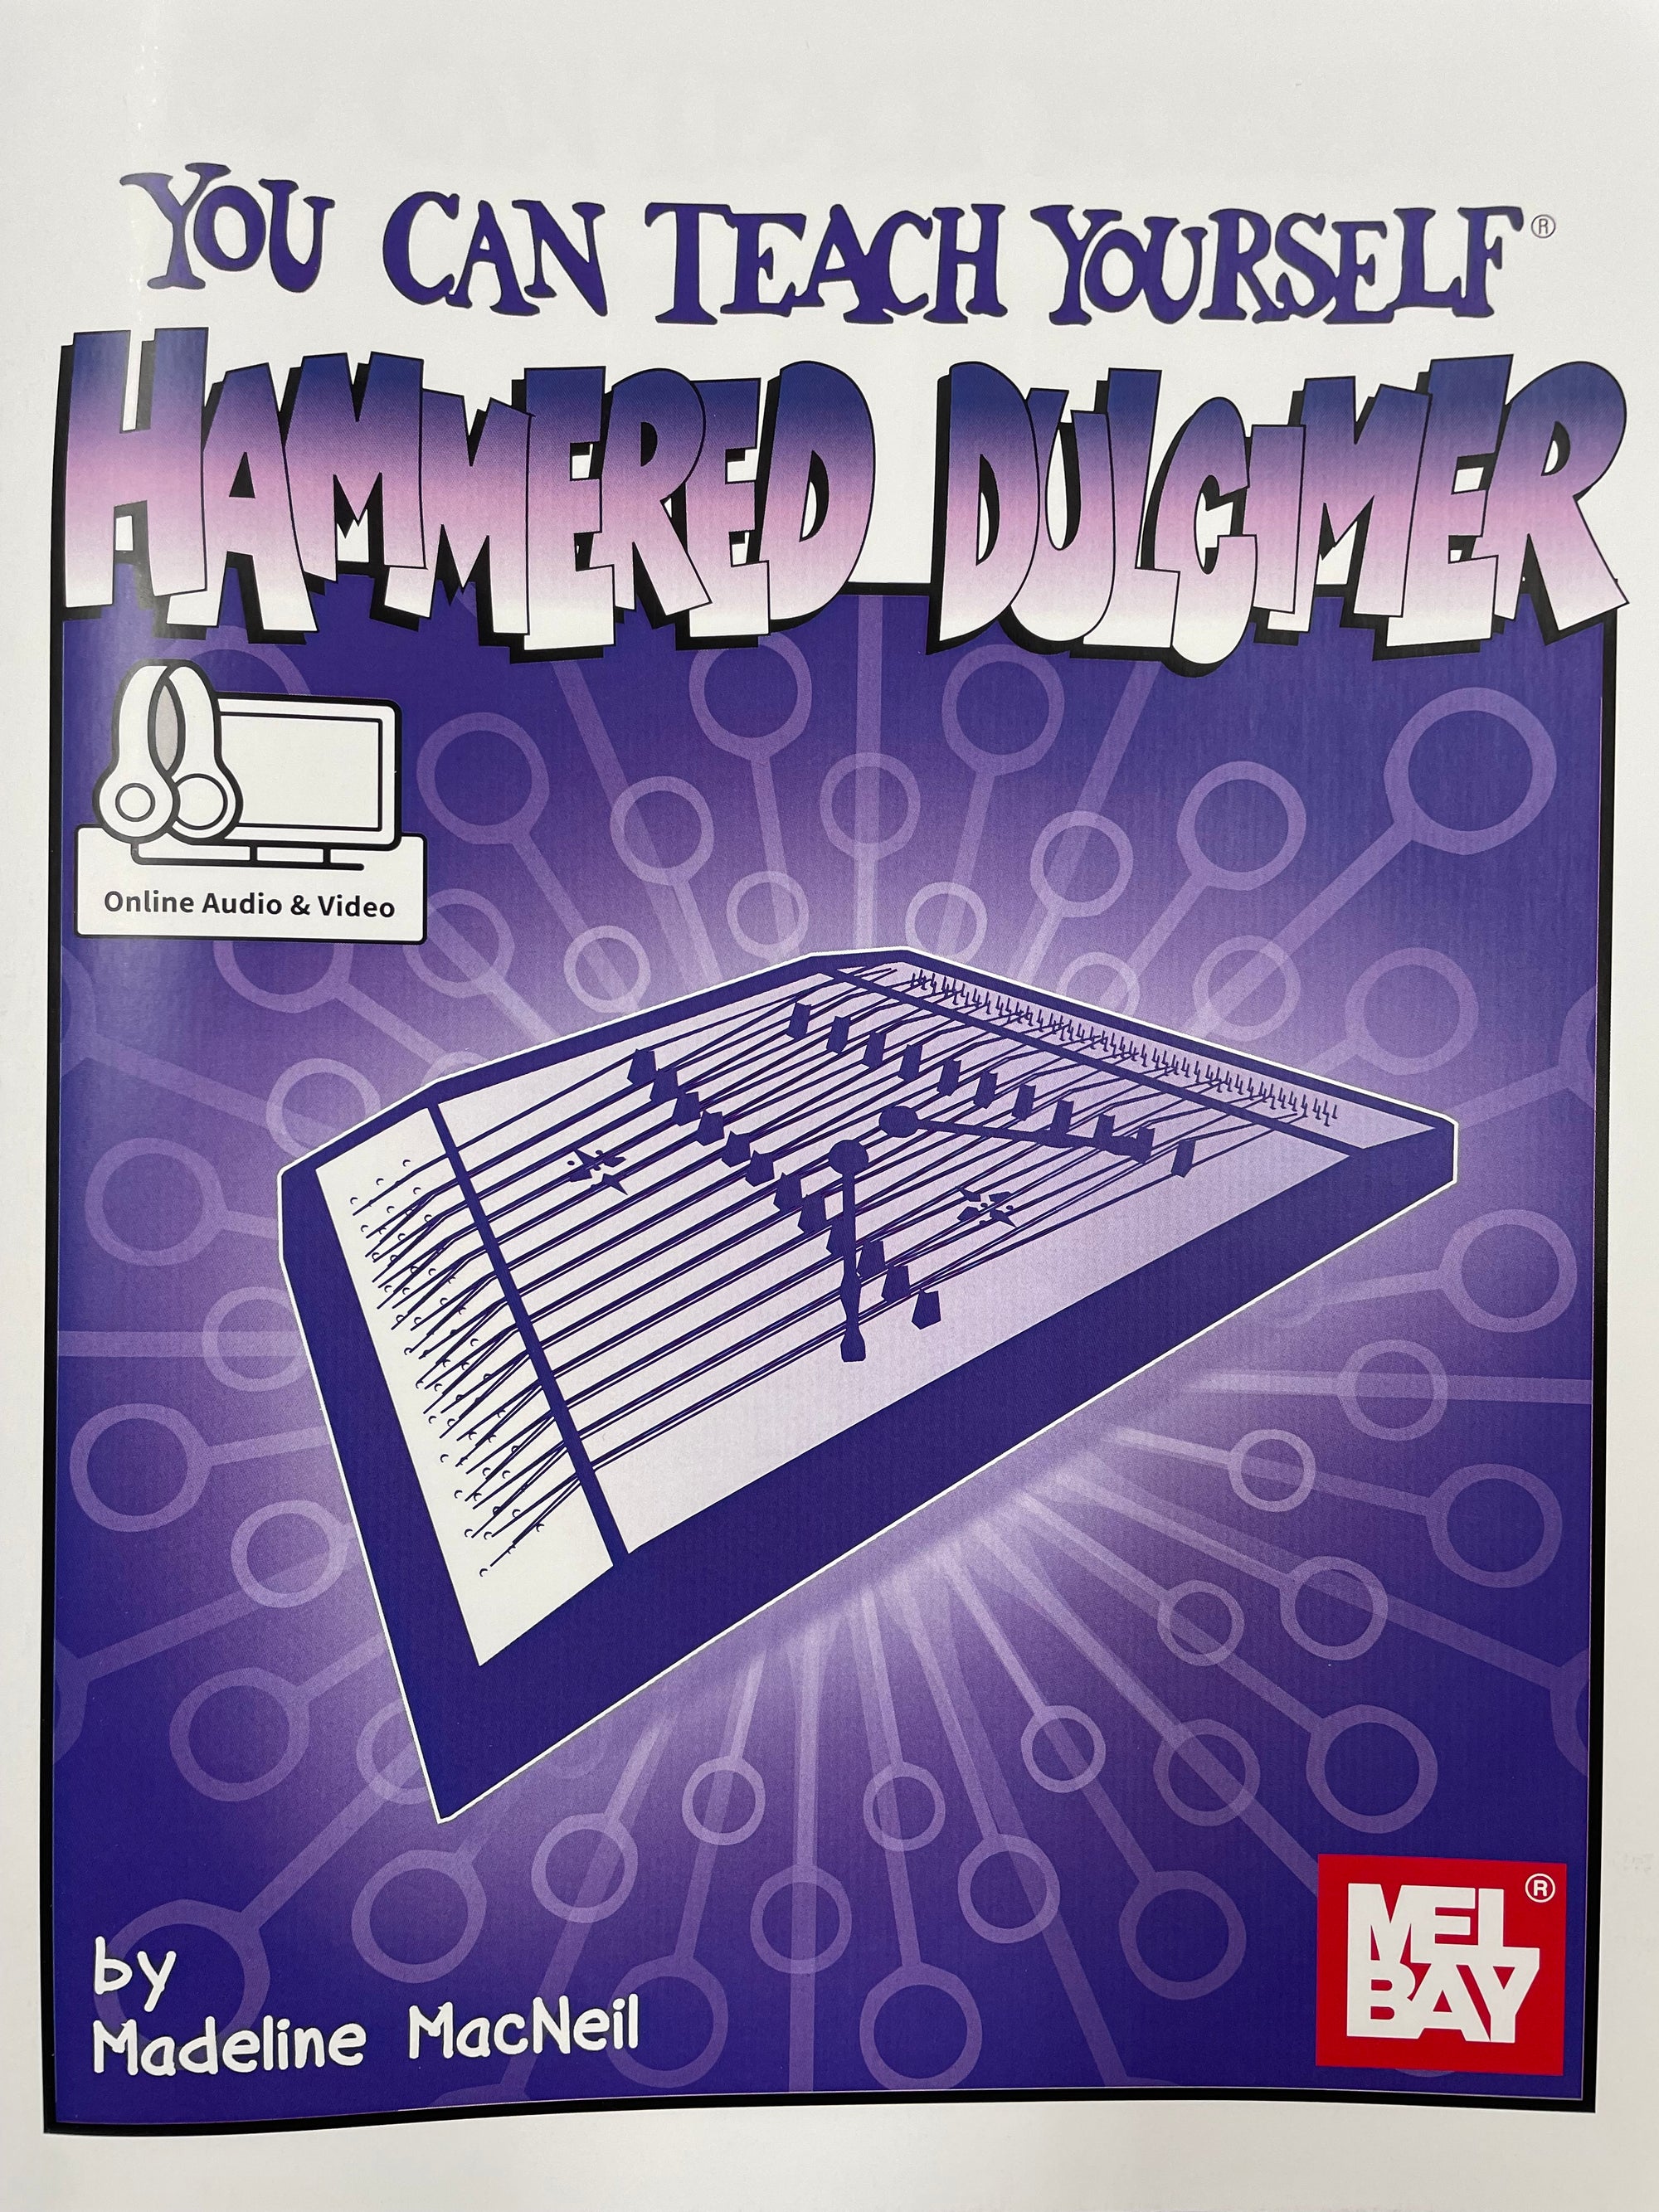 Sentence with product name: A beginning book cover for "You Can Teach Yourself Hammered Dulcimer" by Madeline MacNeil, featuring an illustration of the You Can Teach Yourself Hammered Dulcimer with musical notes and access to online audio.